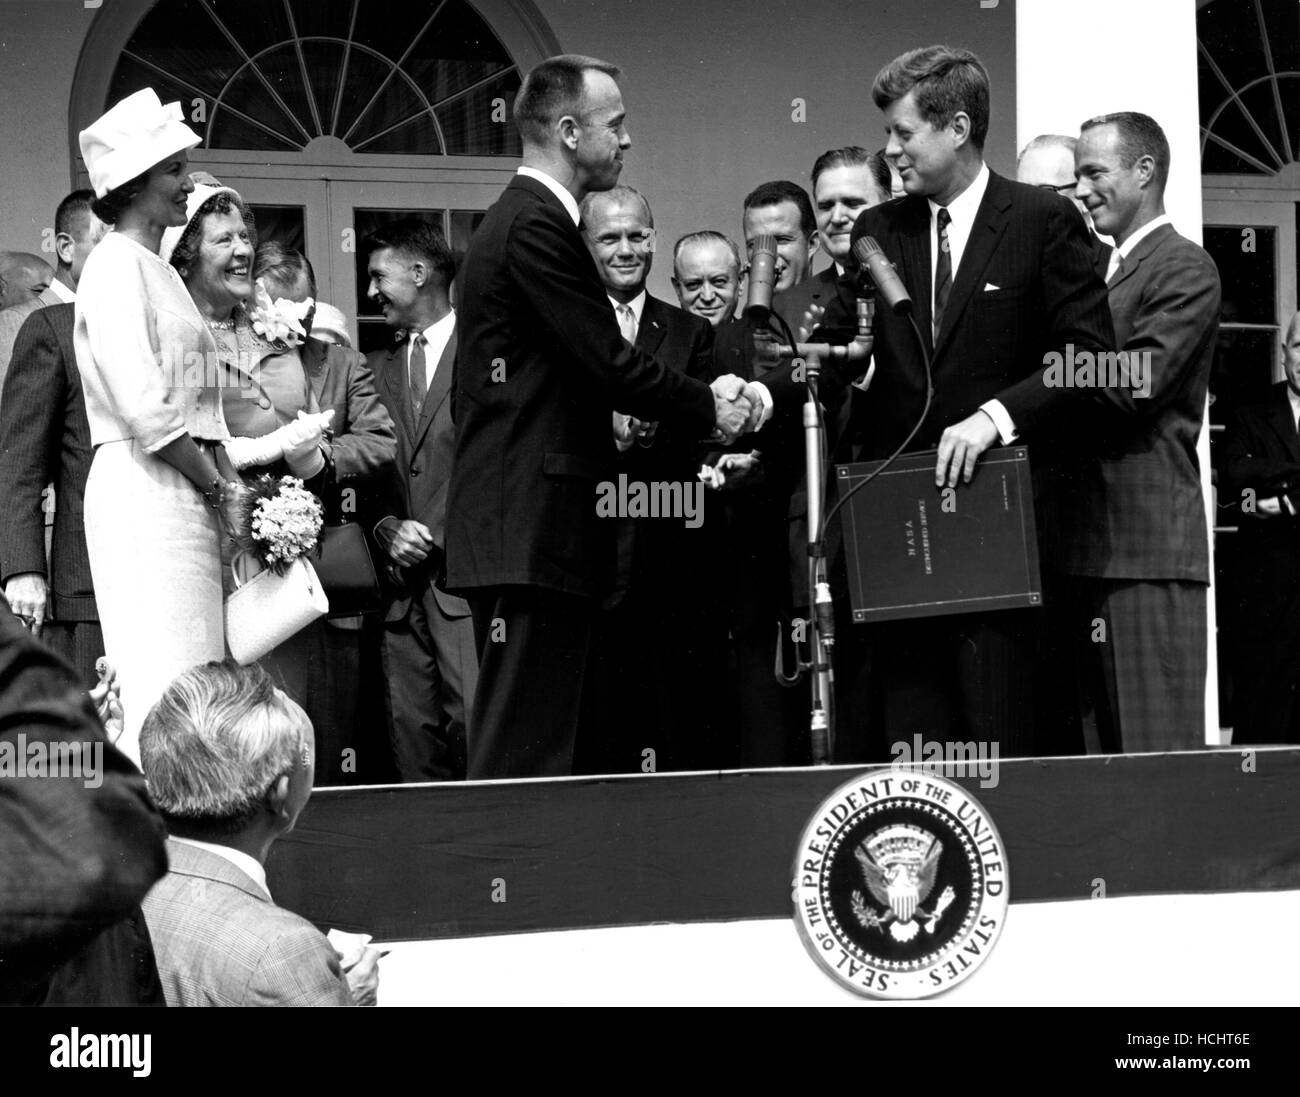 United States President John F. Kennedy congratulates astronaut Alan B. Shepard, Jr., the first American in space, on his historic May 5th, 1961 ride in the Freedom 7 spacecraft and presents him with the National Aeronautics and Space Administration (NASA) Distinguished Service Award, in Washington, D.C. on May 6, 1961. Shepard's wife, Louise (left in white dress and hat), and his mother were in attendance as well as the other six Mercury astronauts, including Colonel John H. Glenn, Jr. and other NASA officals, some visible in the background..Credit: NASA via CNP  - NO WIRE SERVICE - Photo: Na Stock Photo